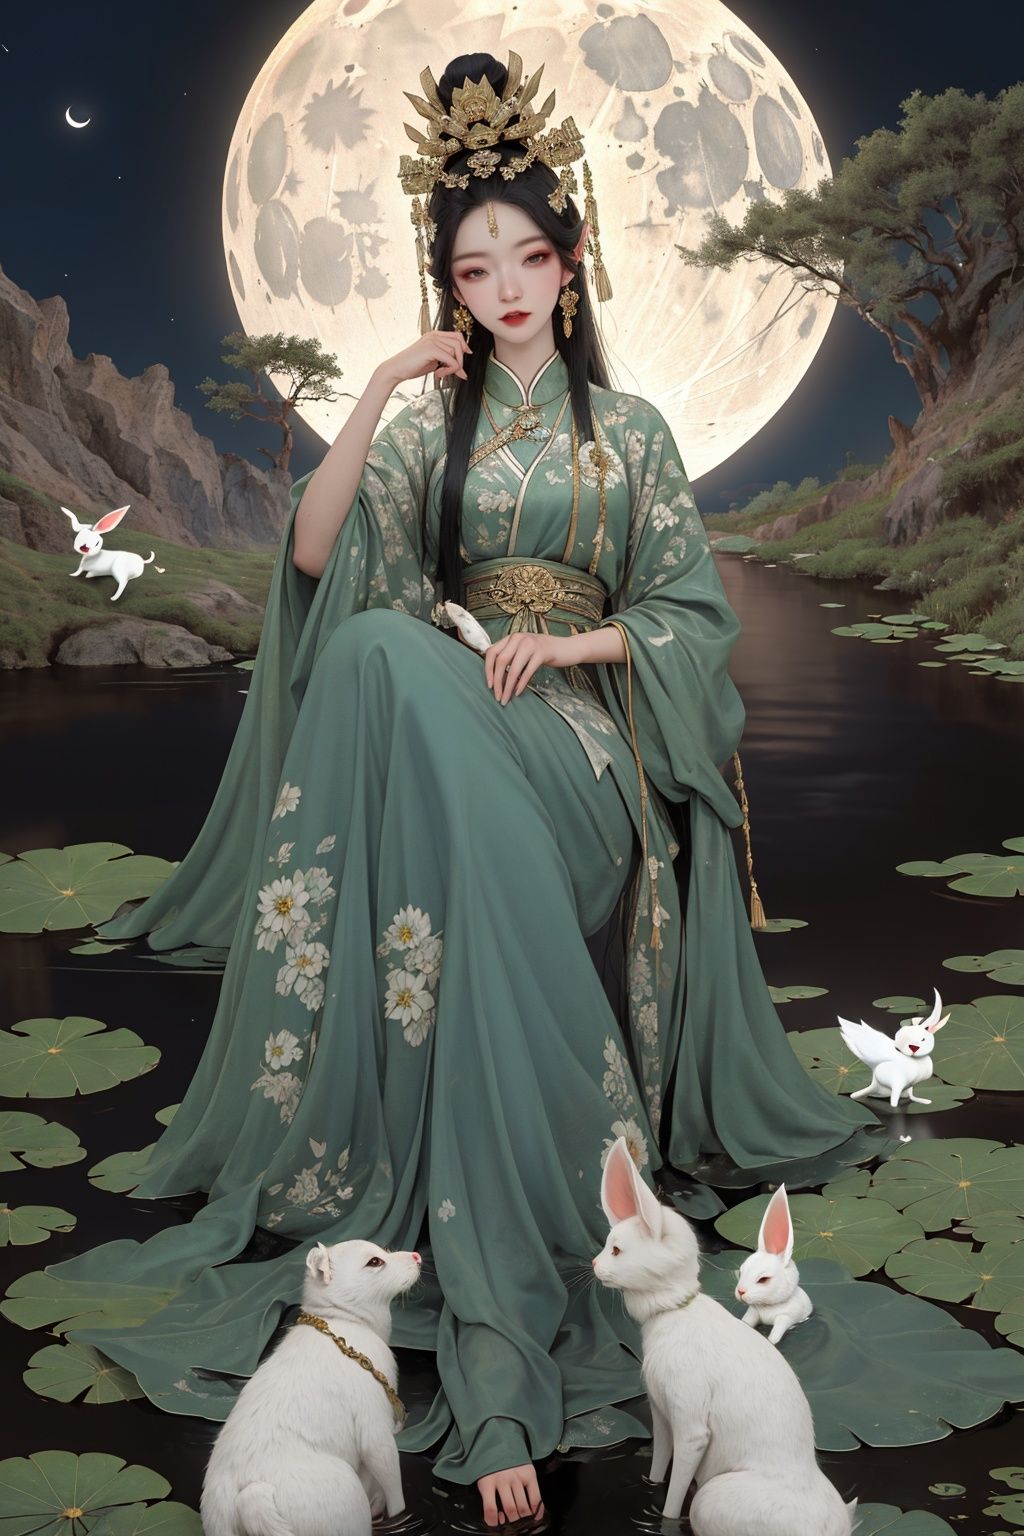 masterpiece,best quality,8K,HDR,exquisite details,1girl,<lora:Chinese Gongbi painting-000009:0.3>,goddess zi on the moon flying near the pond with some lotus flowers,Holding a white rabbit,in the style of harmonious color palette,multilayered compositions,detailed character design,nightmarish illustrations,light amber and green,traditional costumes,vibrant murals,